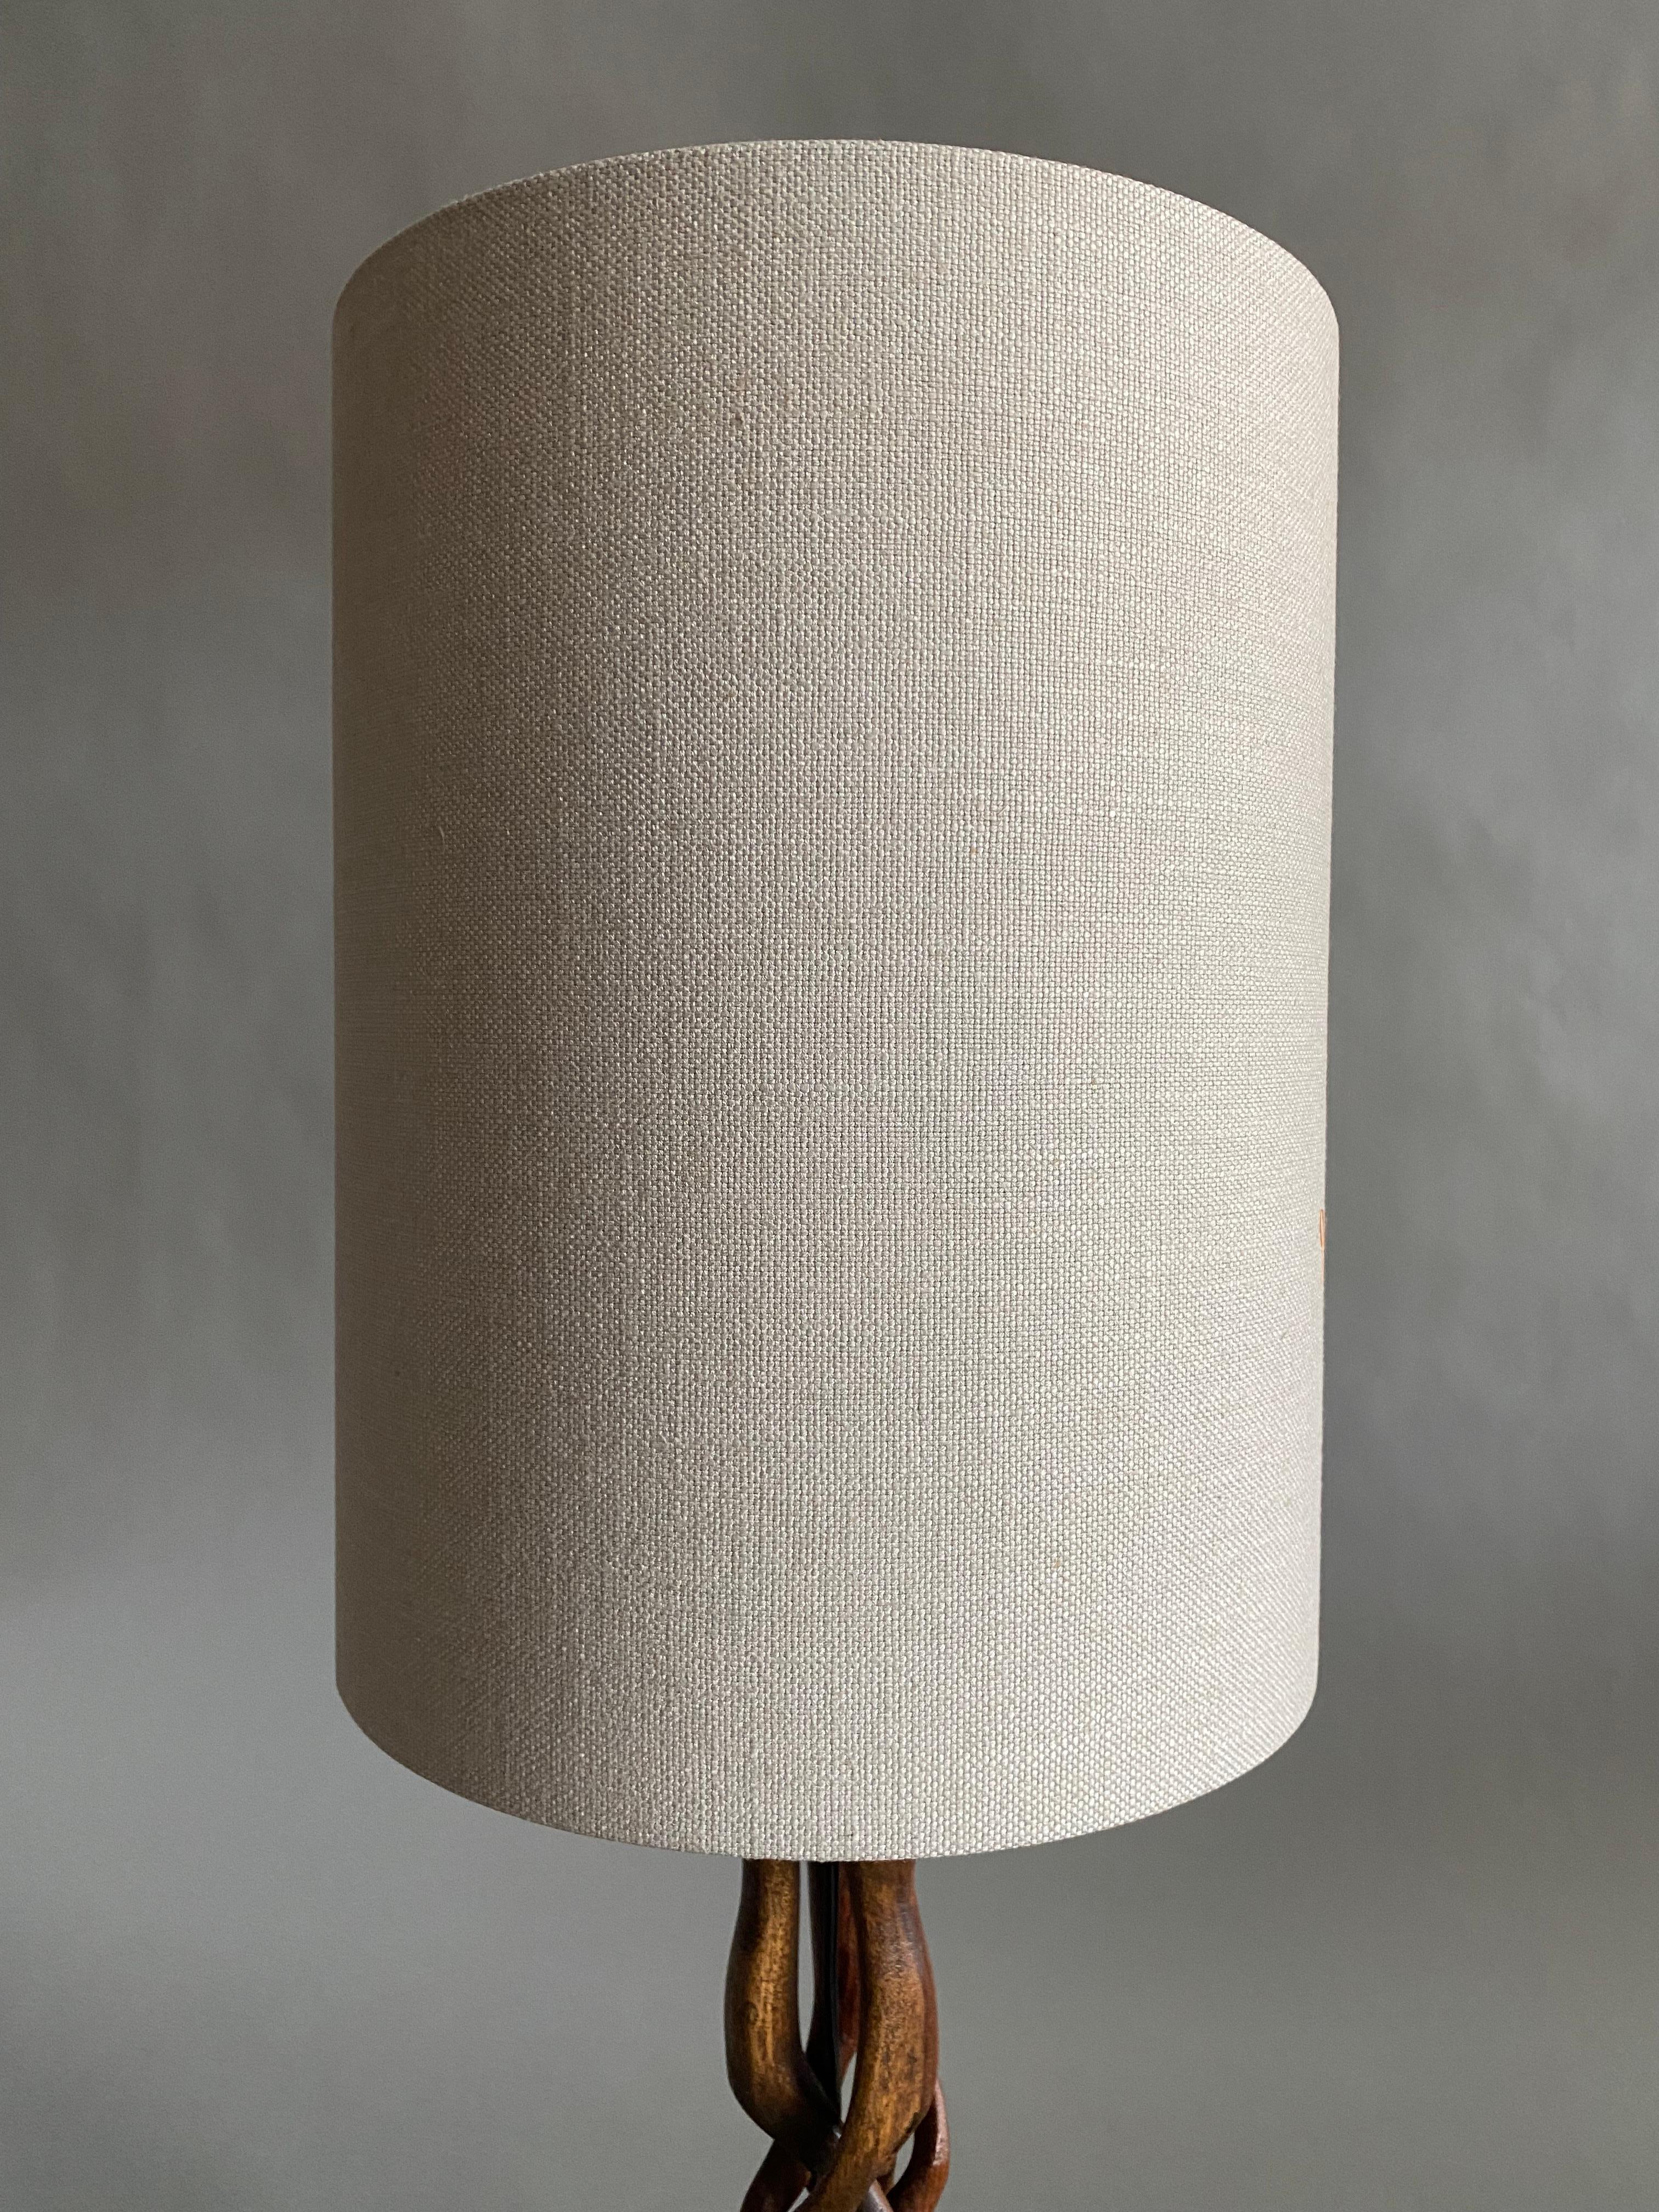 Danish Hand Carved Mid Century Modern Sculptural Wooden Table Lamp For Sale 5